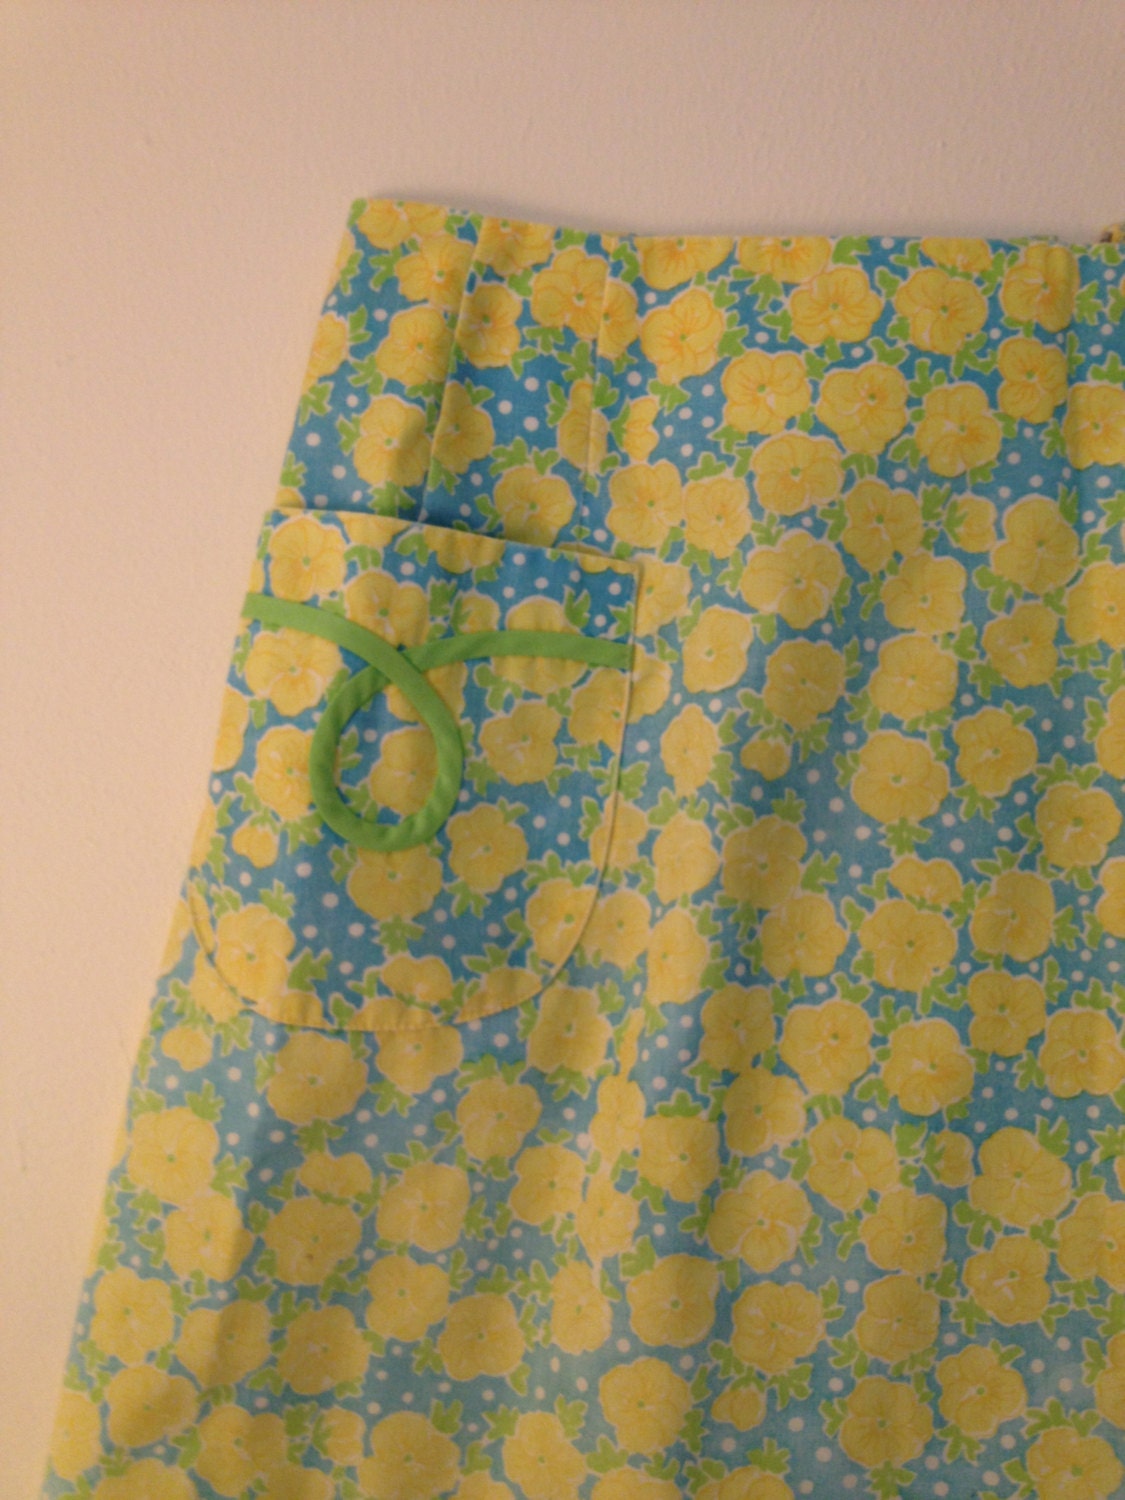 Lilly Pulitzer Skirt / Preppy Pattern in Turquoise Aqua W - Etsy